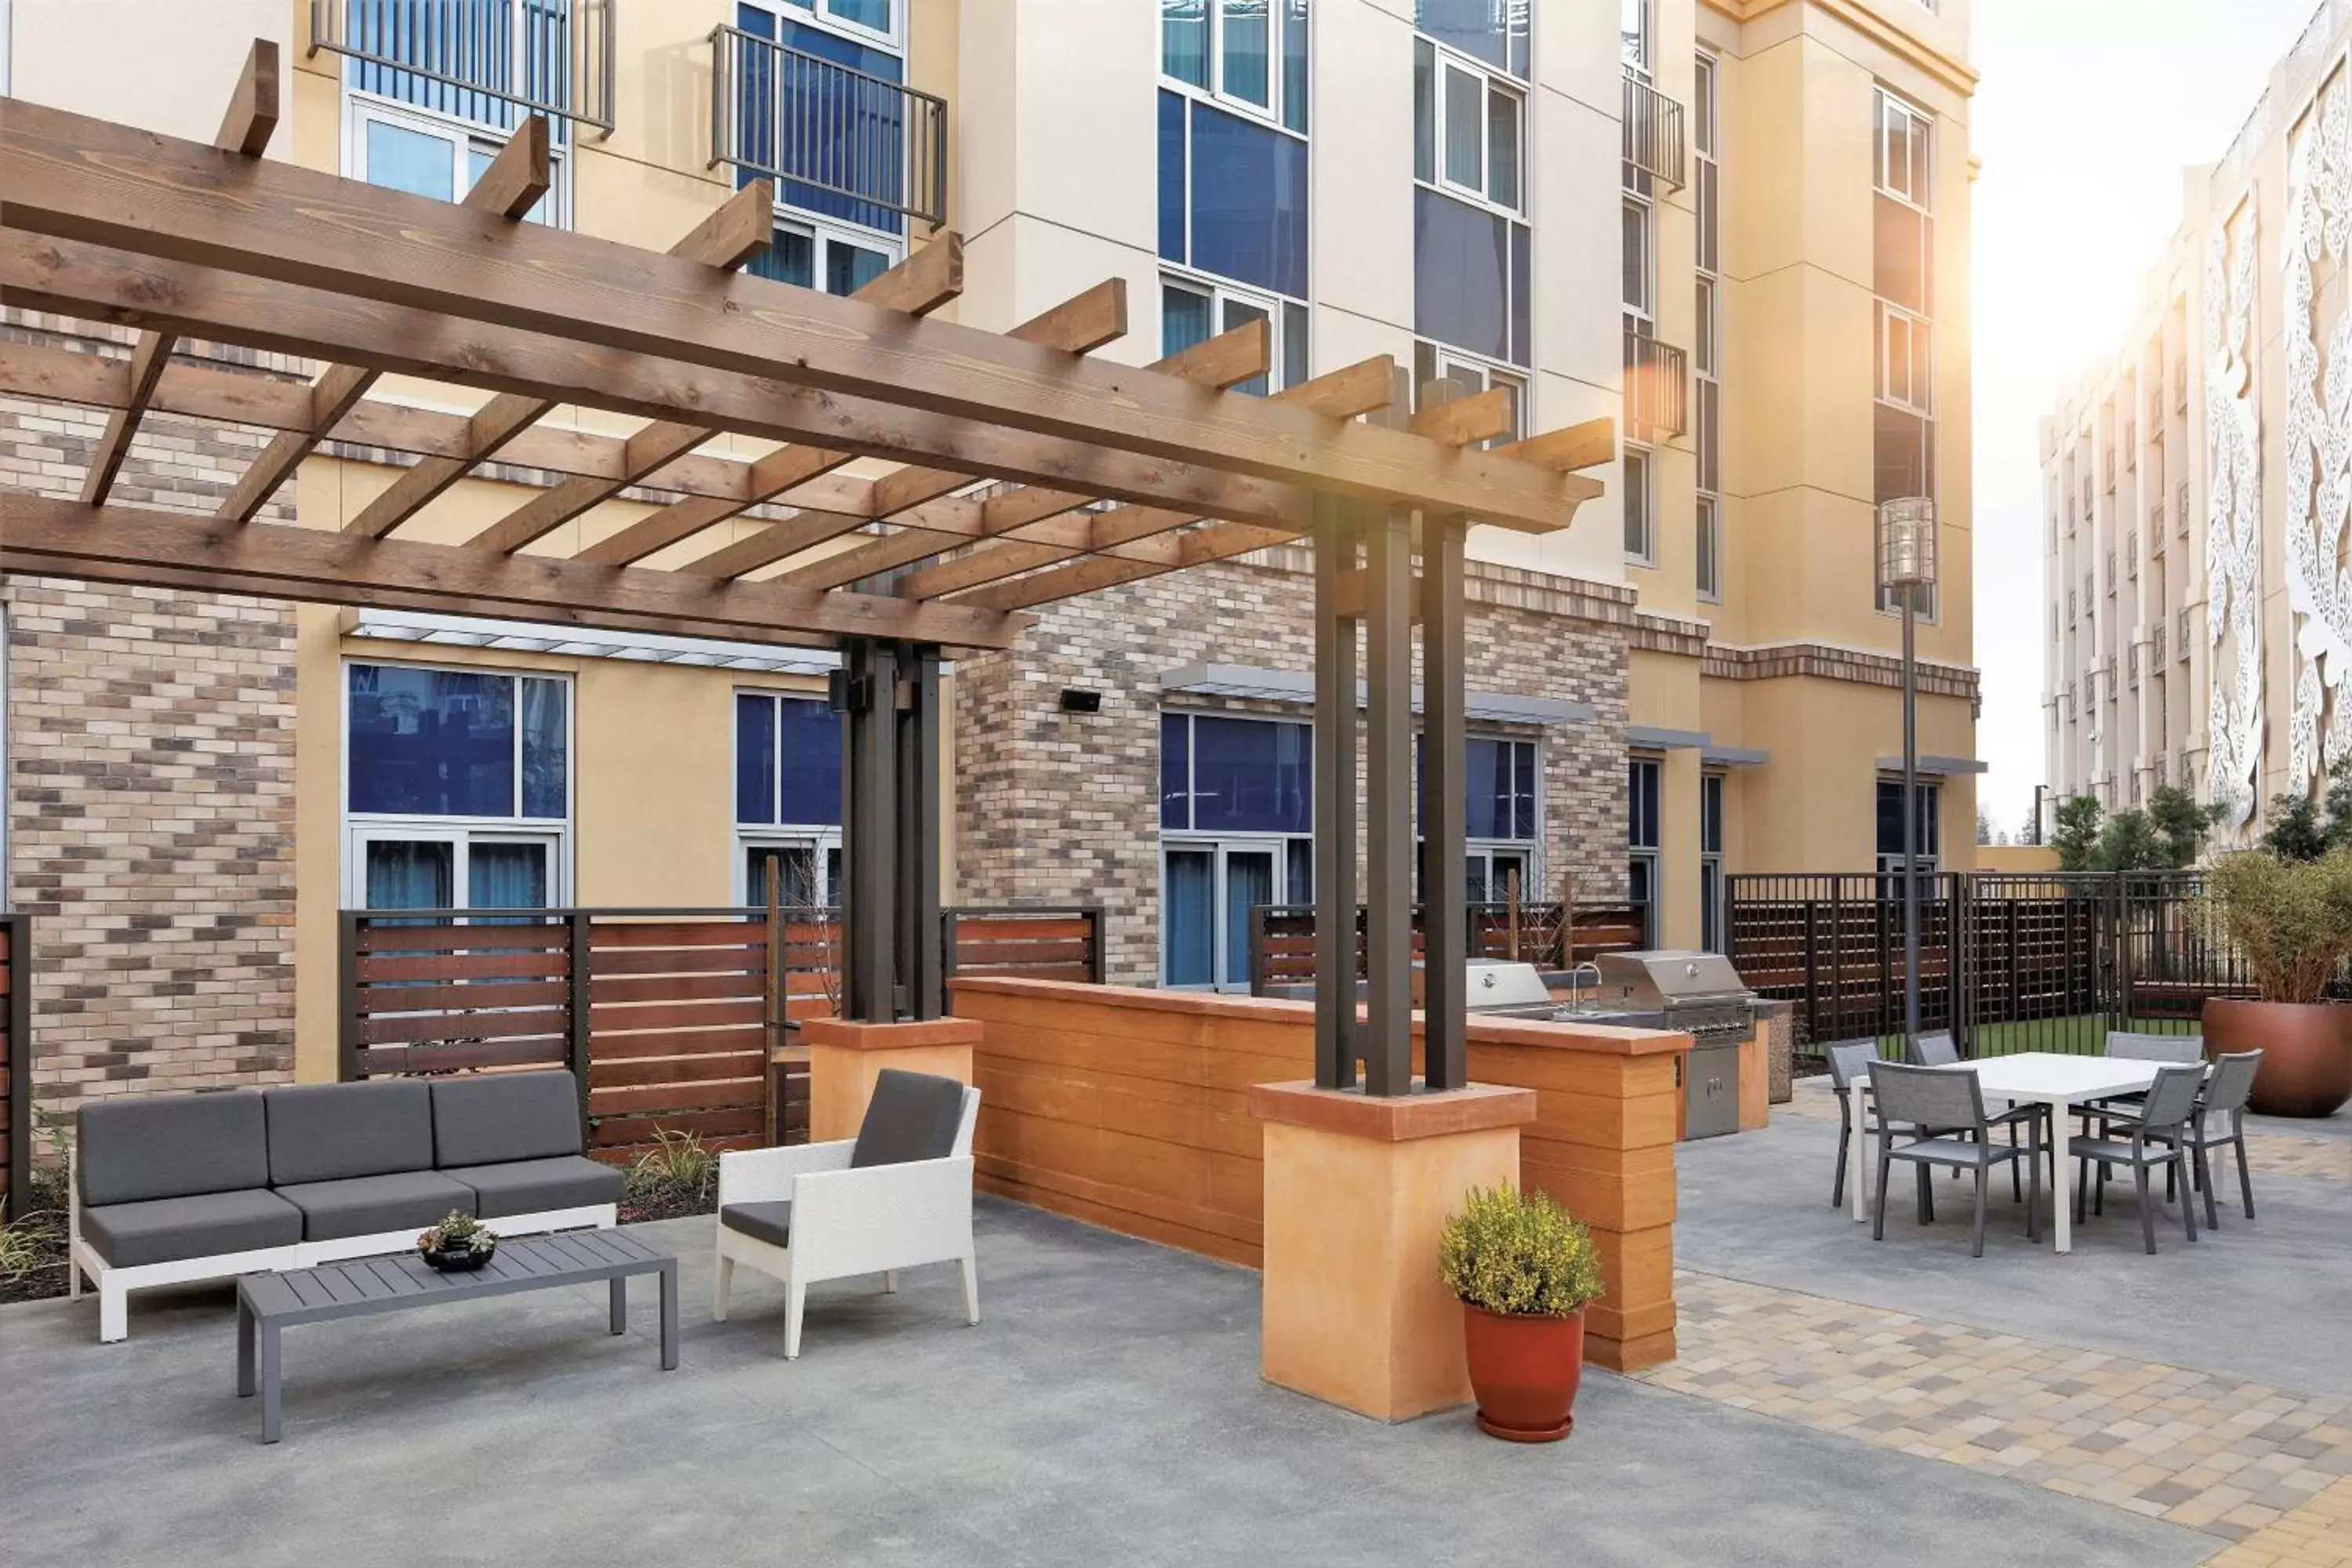 Property building in Residence Inn by Marriott San Jose Cupertino